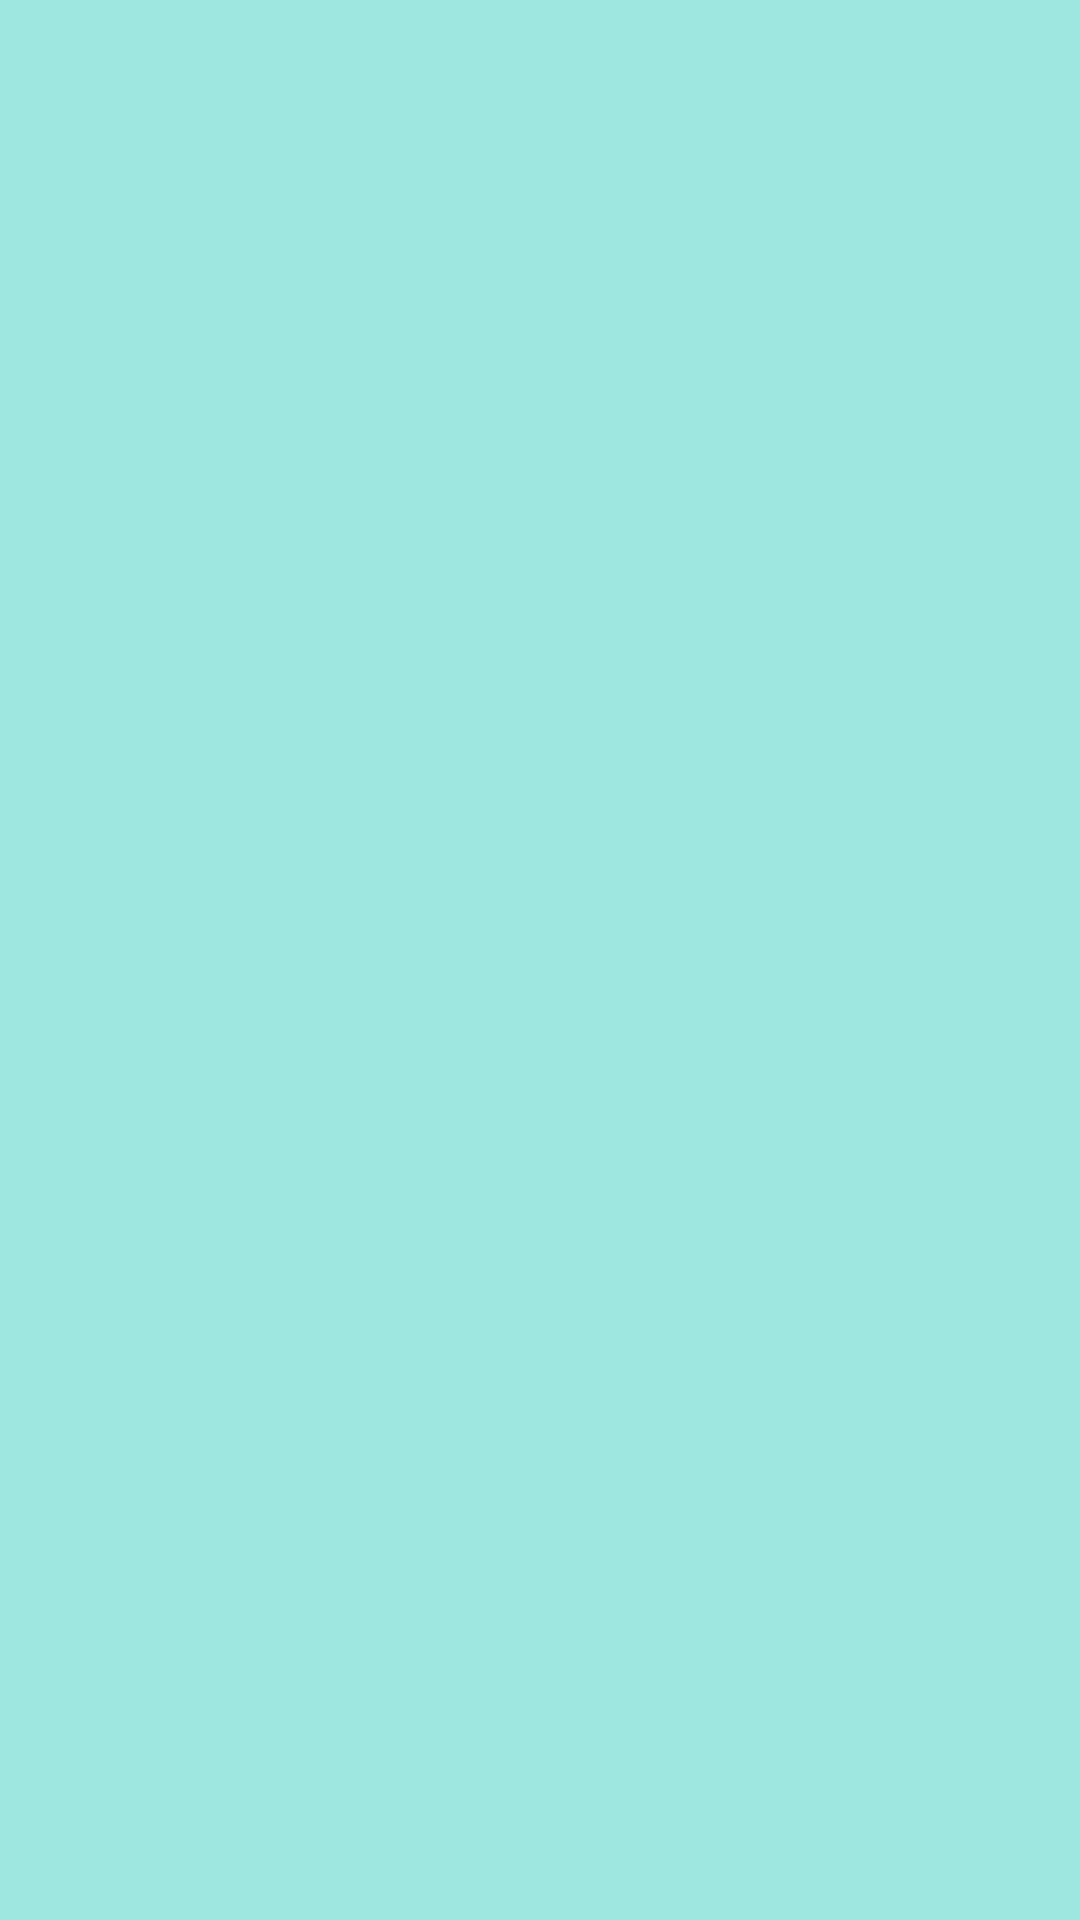 A light blue background with a black line in the middle. - Teal